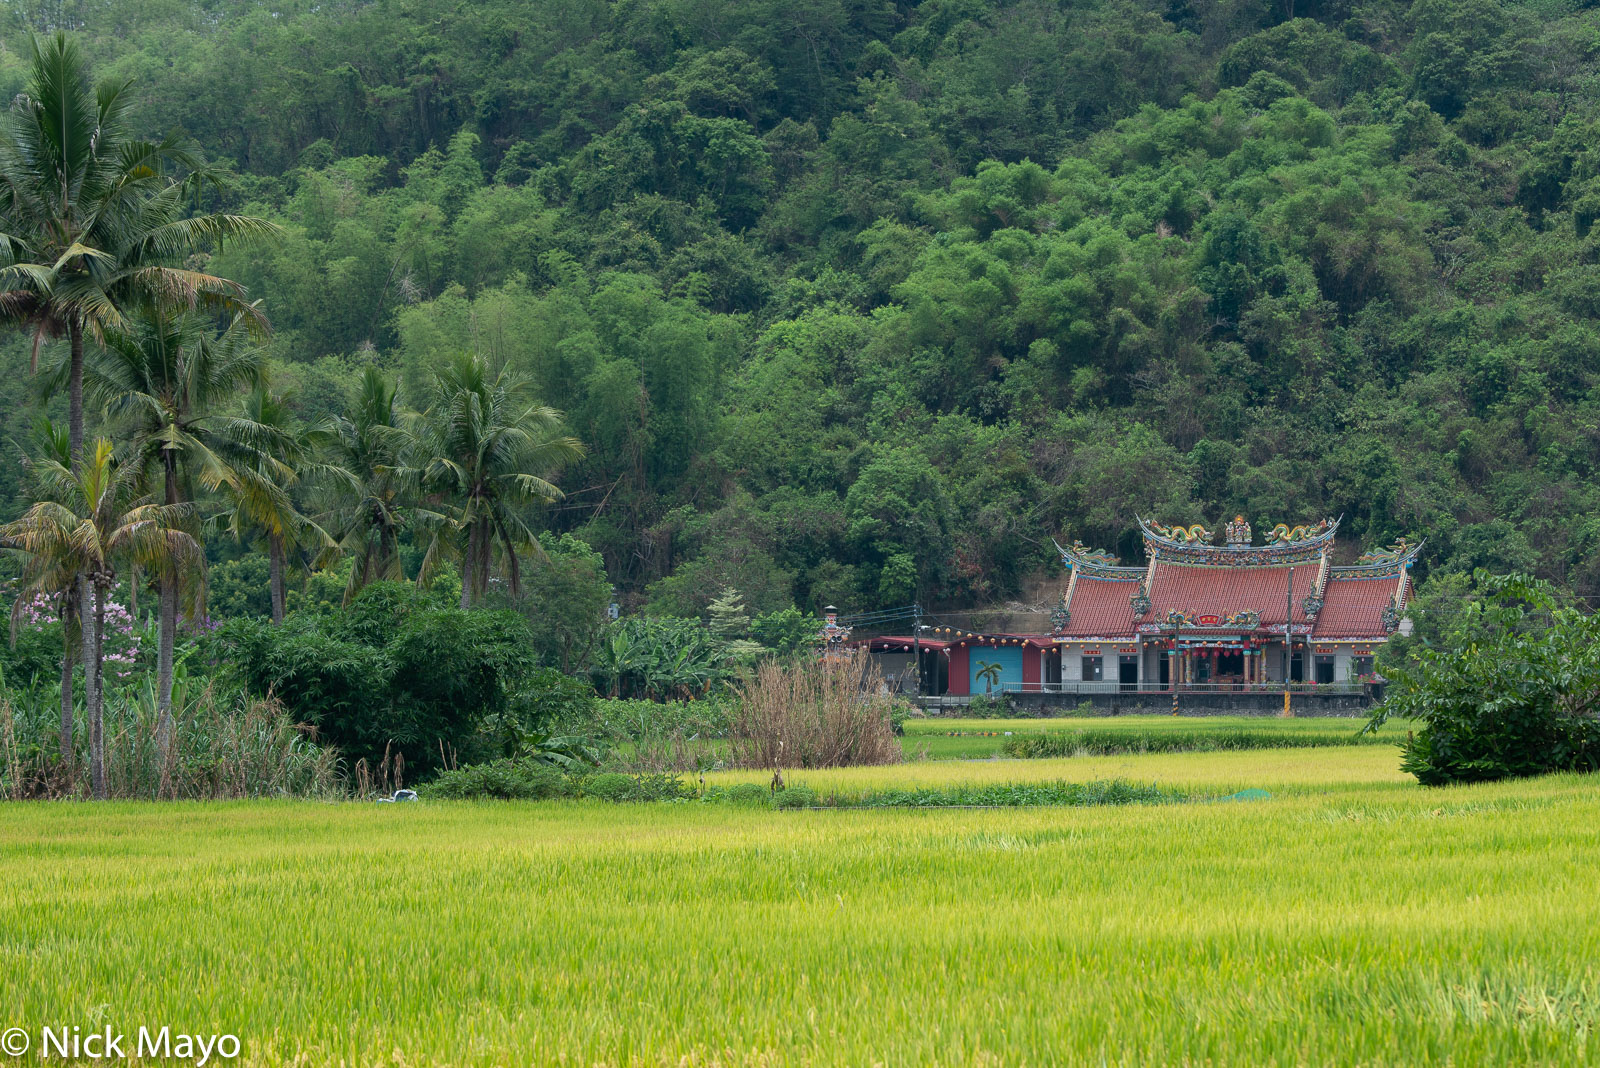 A temple near Meinong set behind coconut palms and paddy fields.